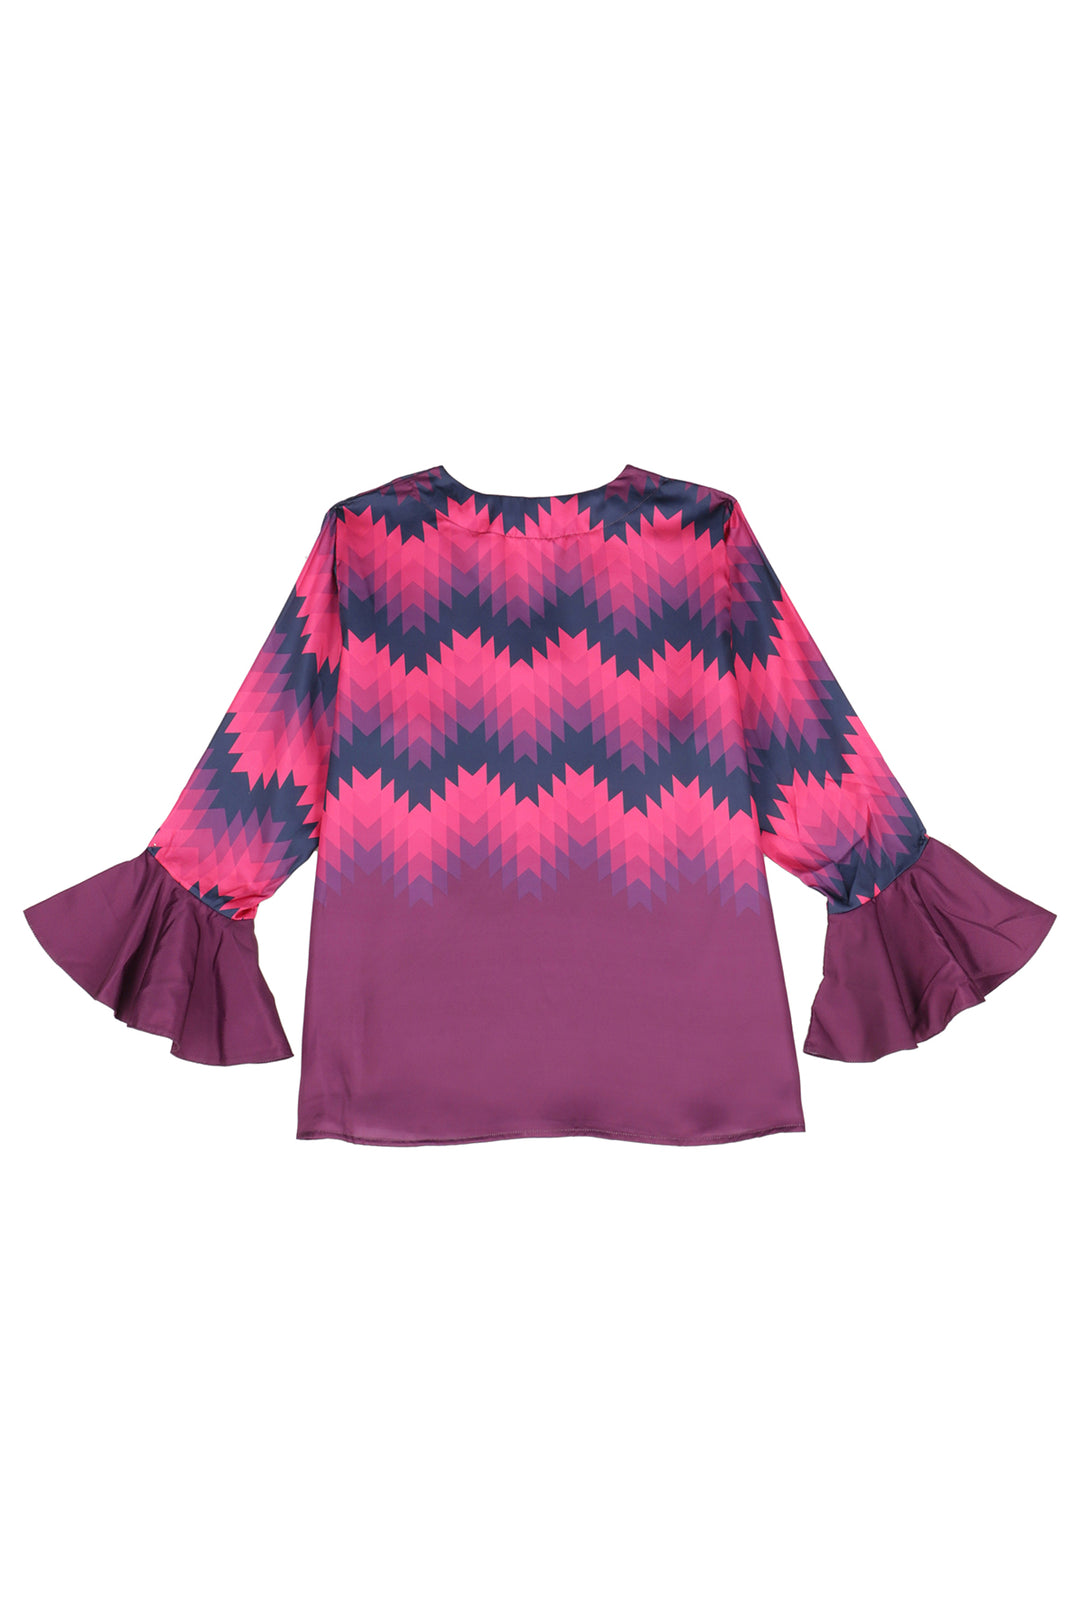 Aztec Flared Sleeves Top - A21 - WWT0008